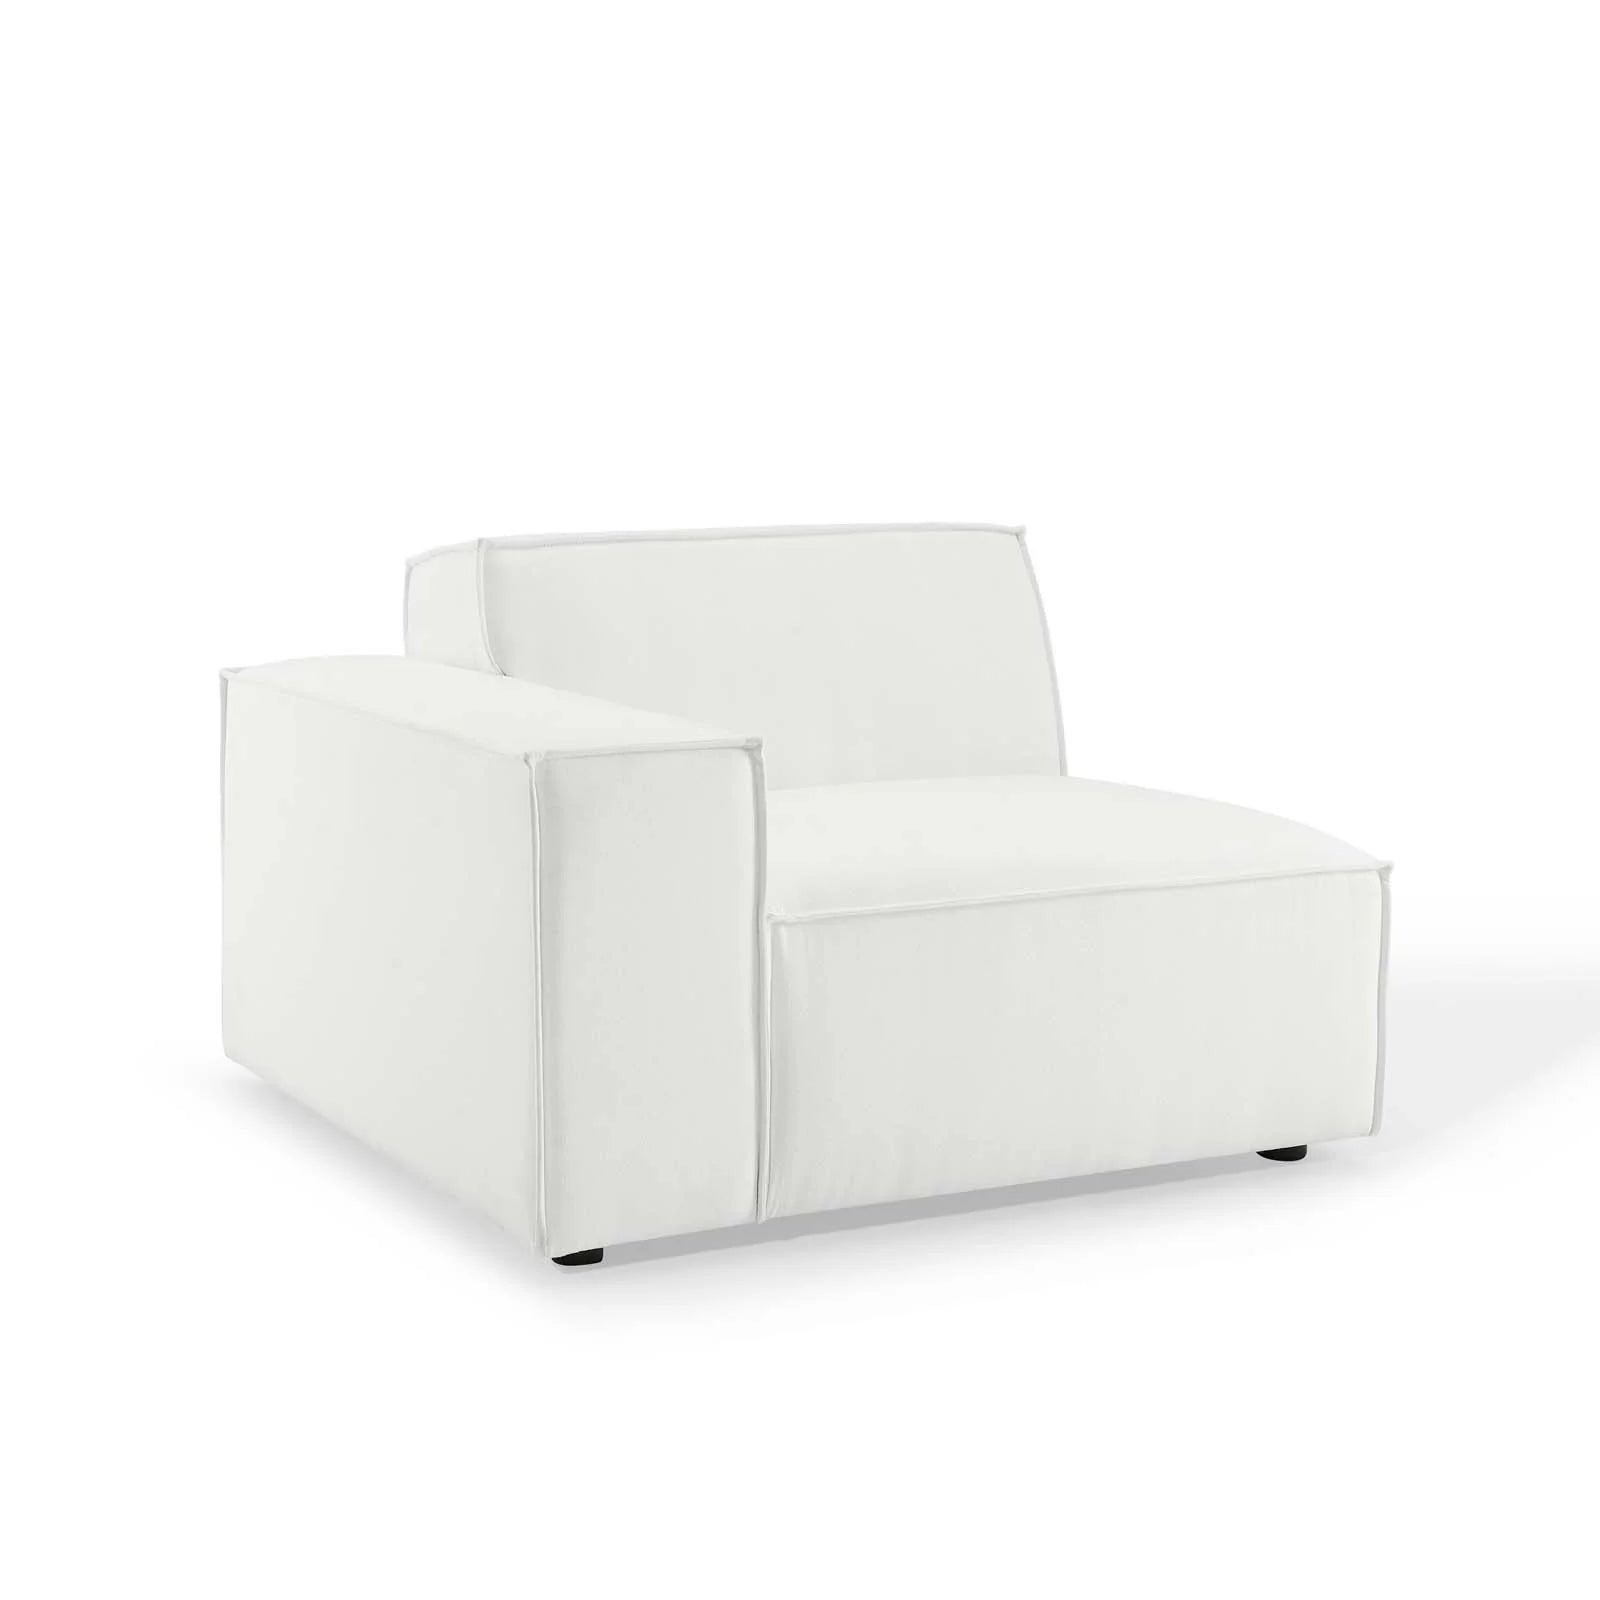 Breeze 5 Piece Extended Sectional - White